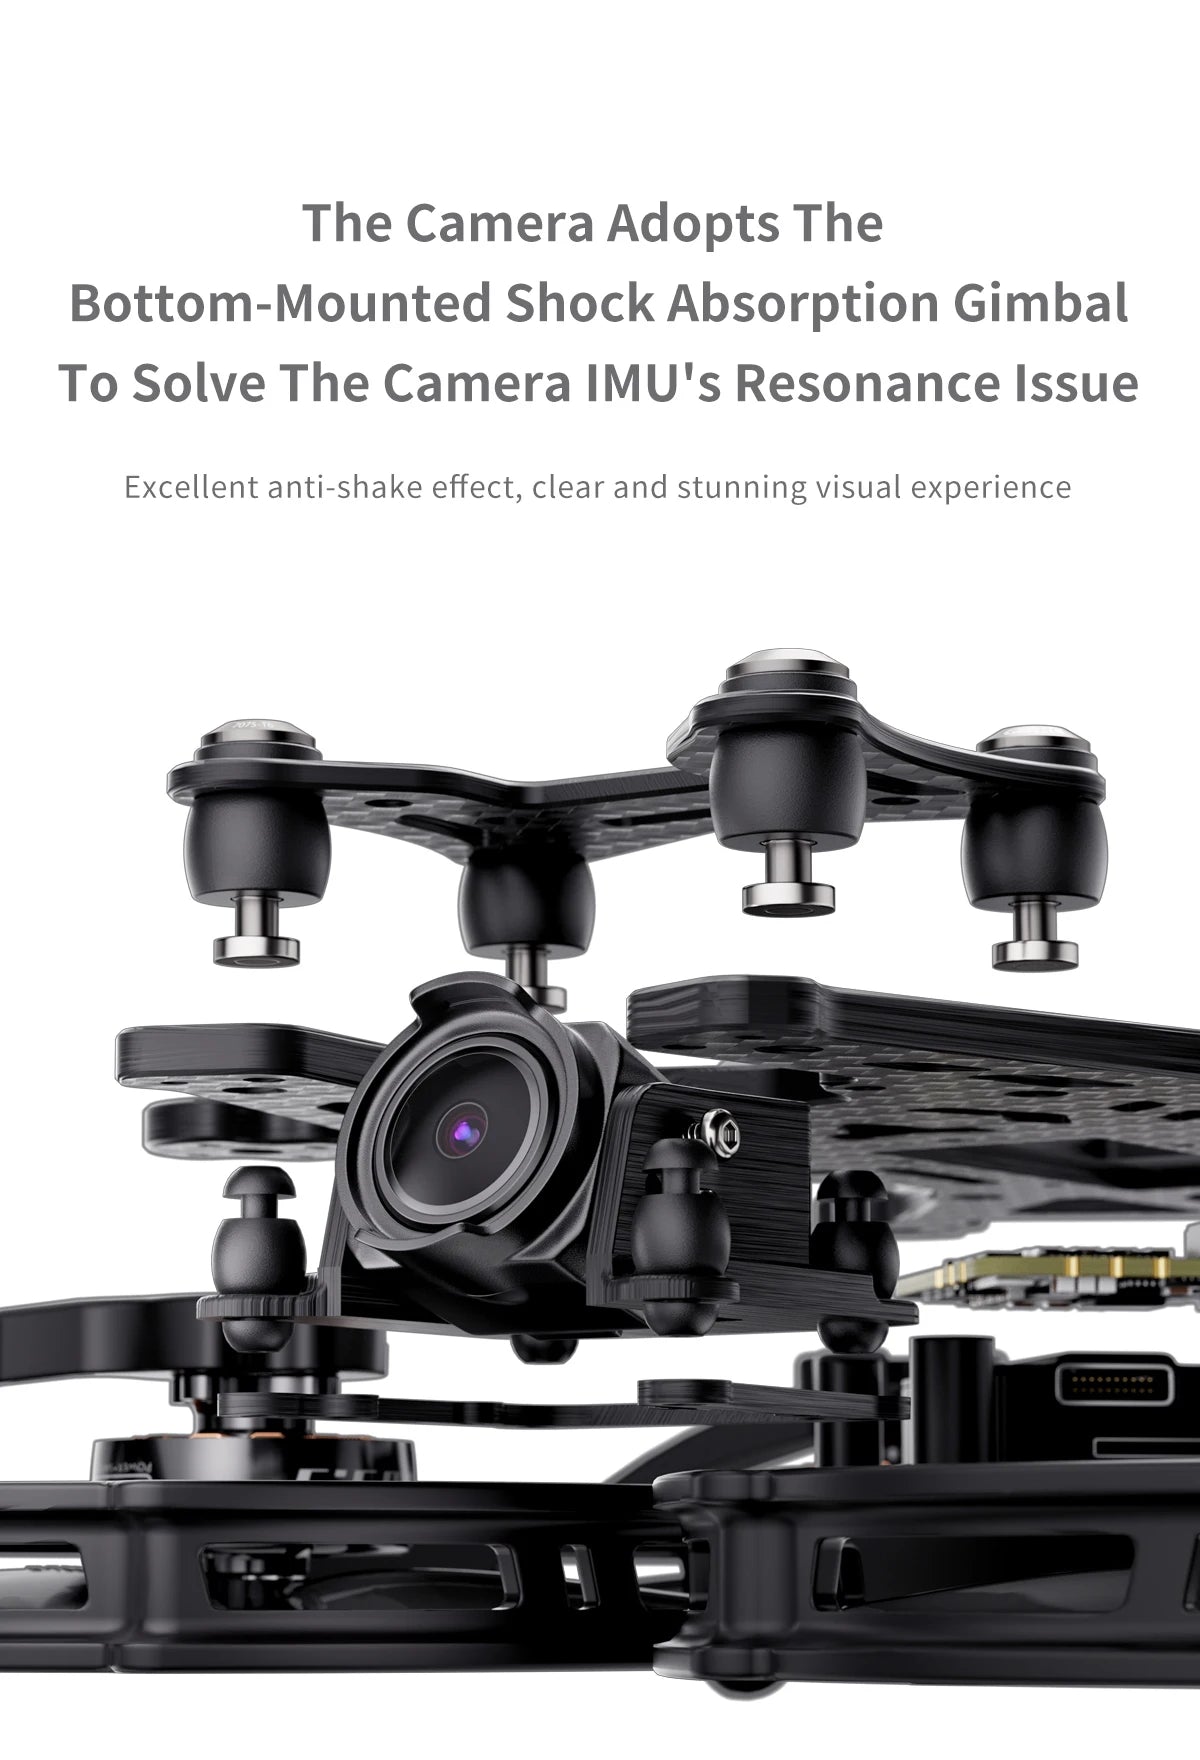 GEPRC Cinelog35 V2 Analog FPV Drone, Camera Adopts The Bottom-Mounted Shock Absorption Gimbal To